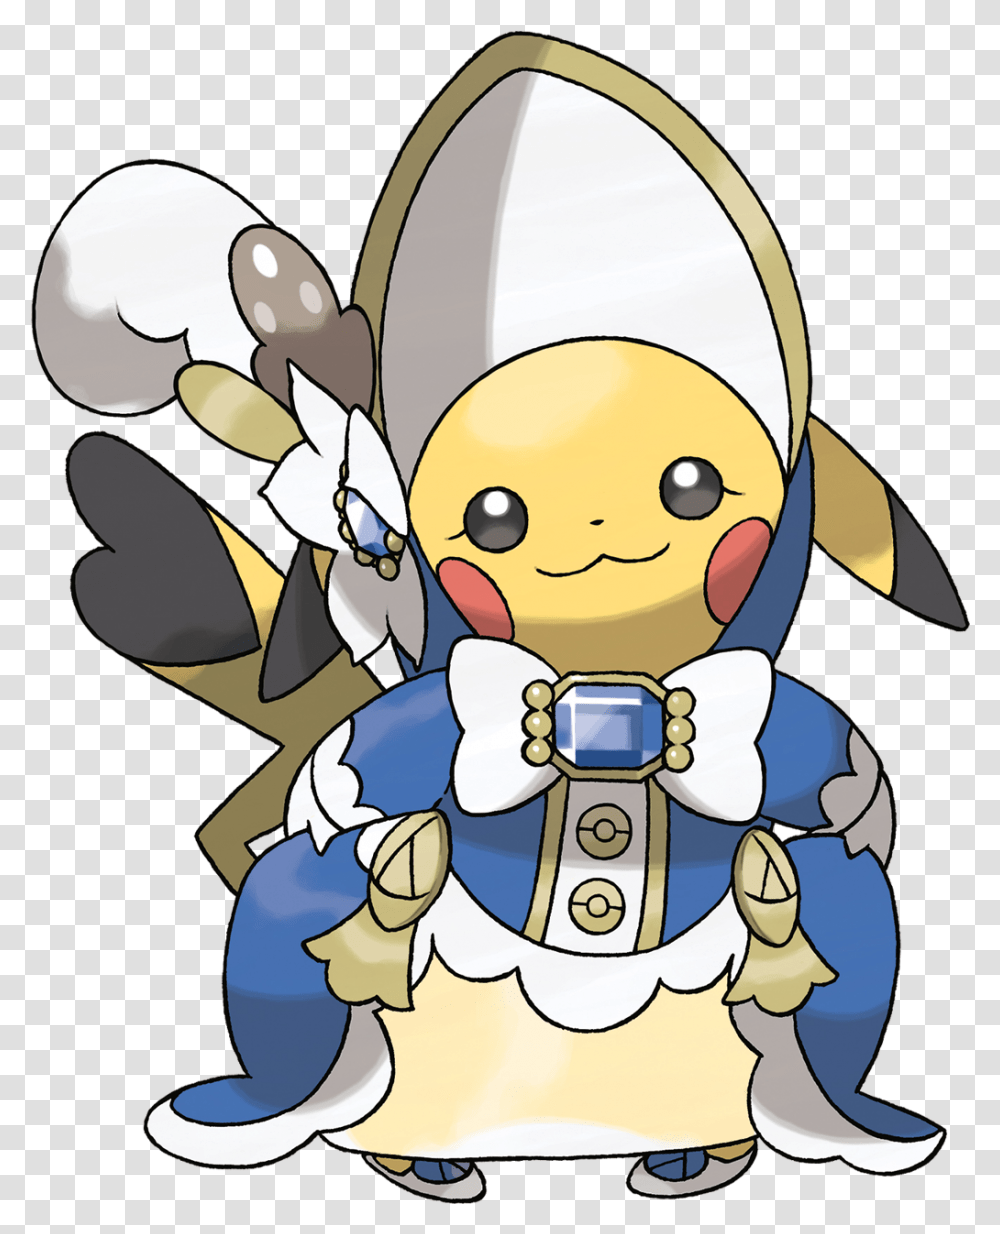 Pokemon Pikachu Belle Is A Fictional Character Of Humans Pikachu Belle, Painting Transparent Png